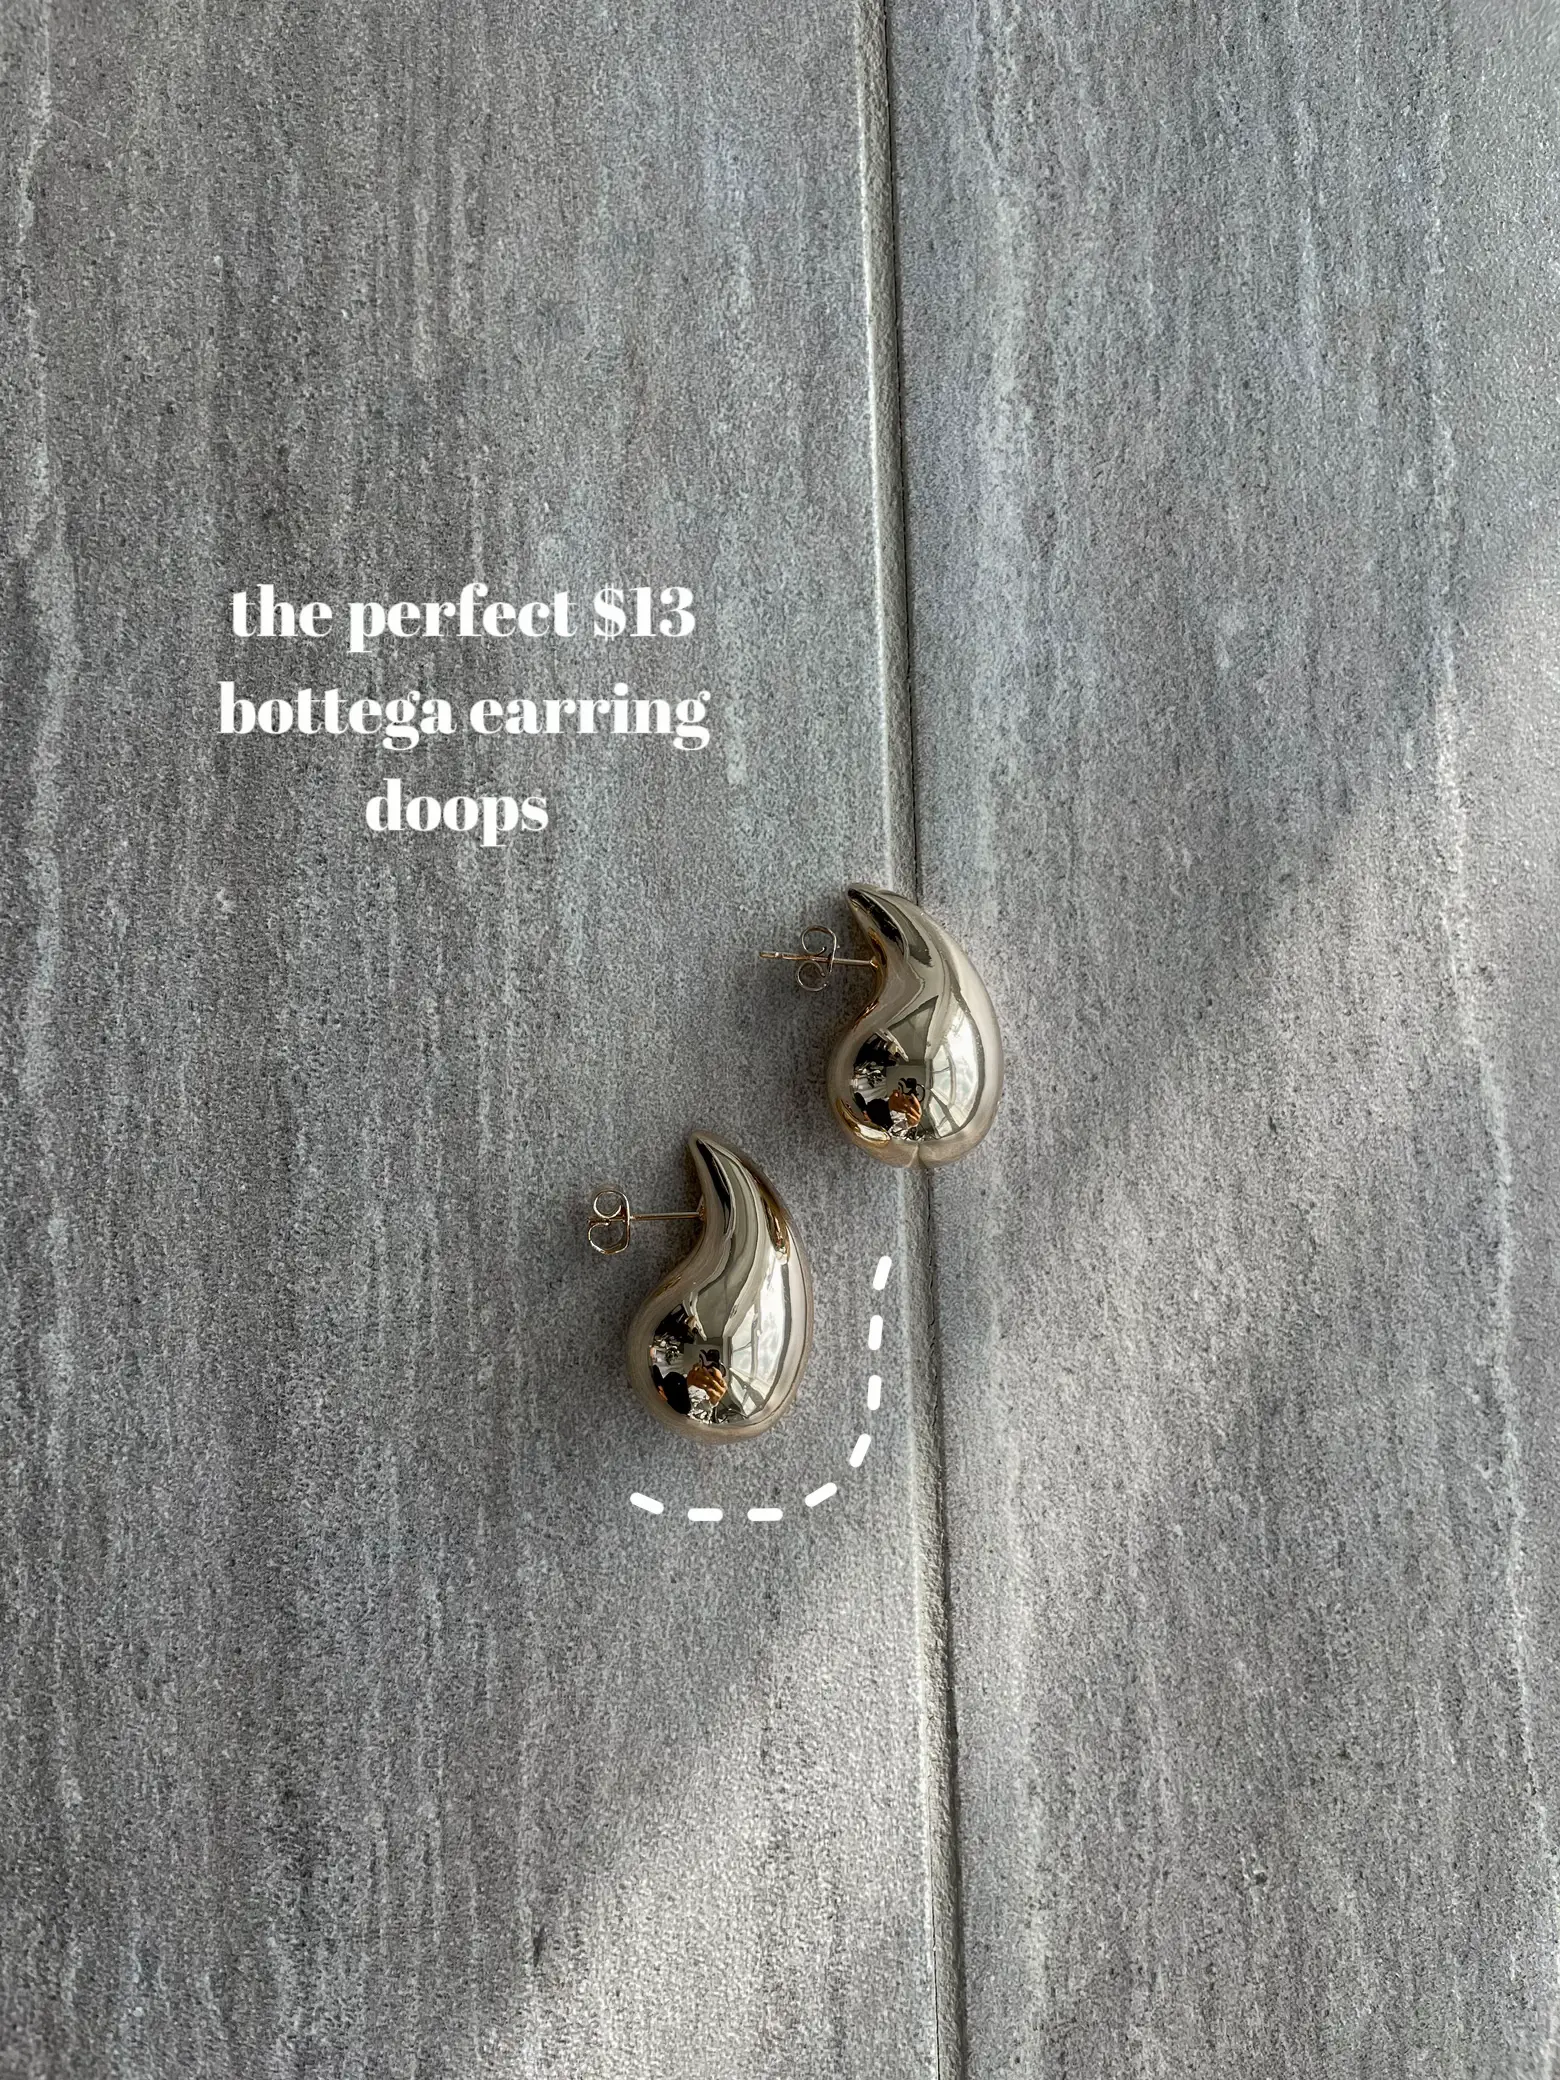  The image shows two bottega earring doops, one on each side of the other.